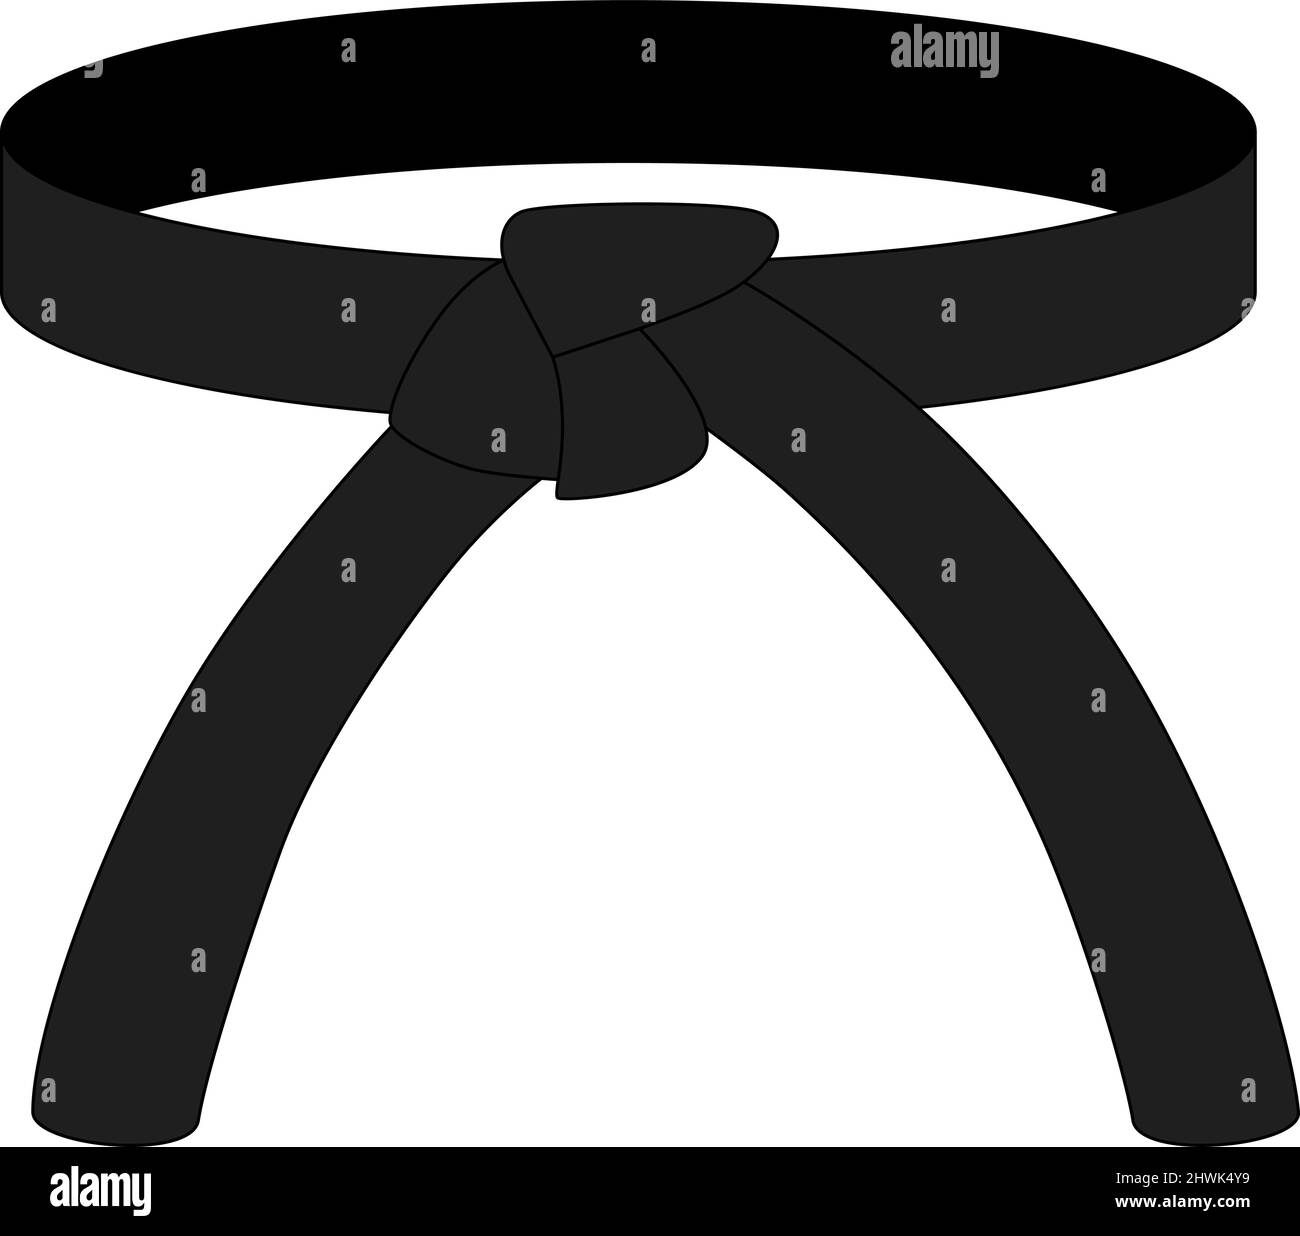 Karate belt black color isolated on white background. Design icon of ...